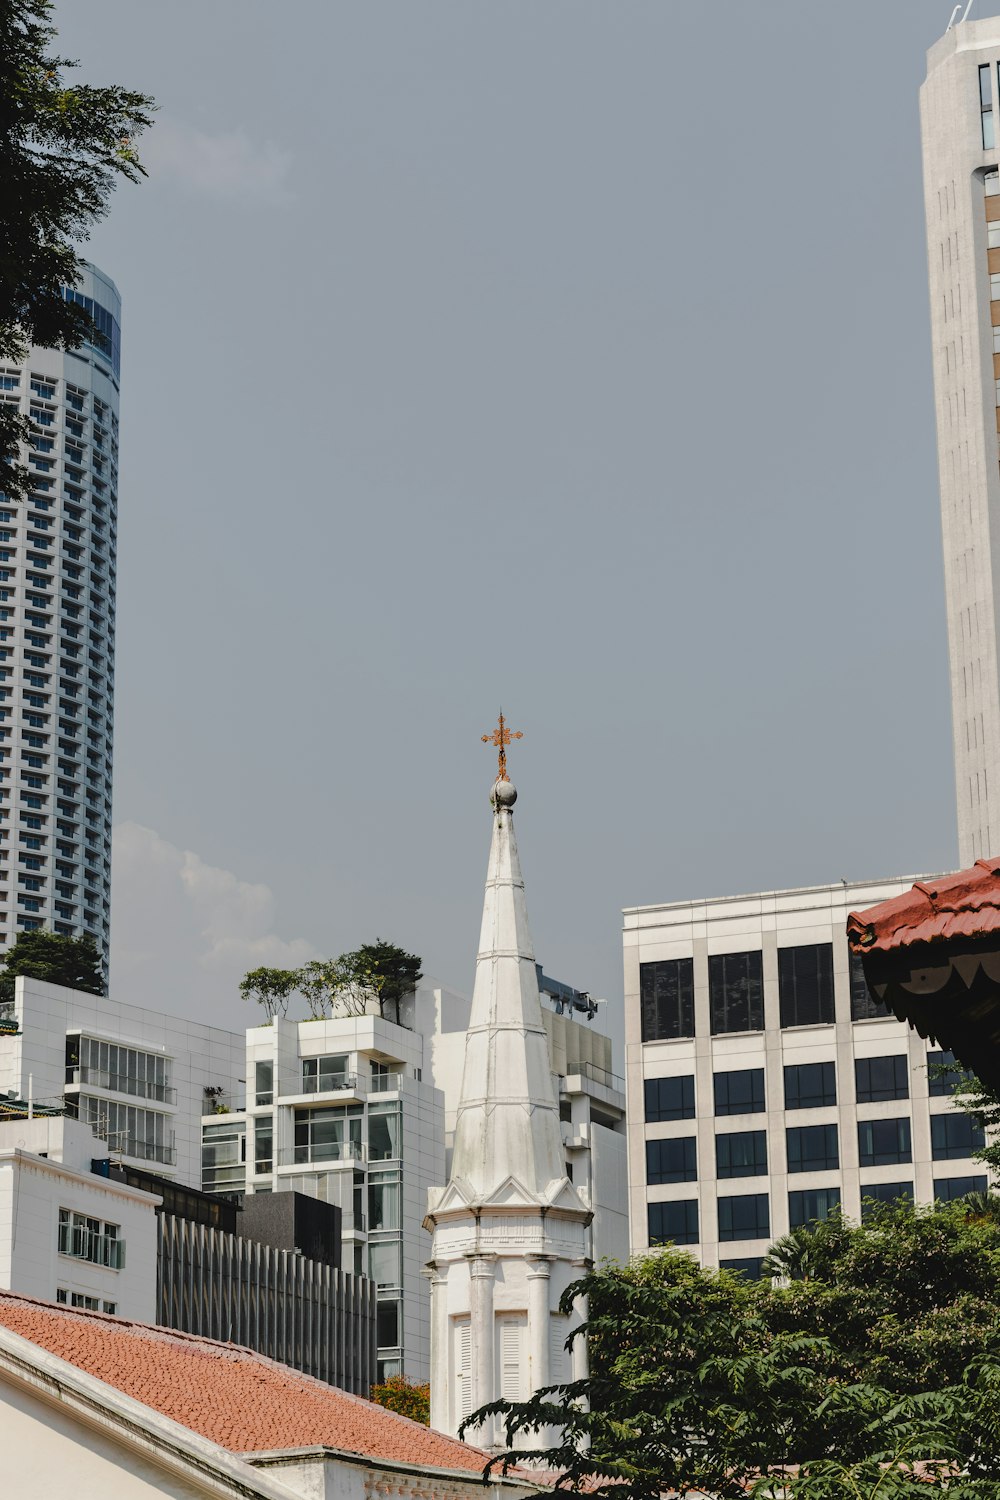 a church steeple in the middle of a city